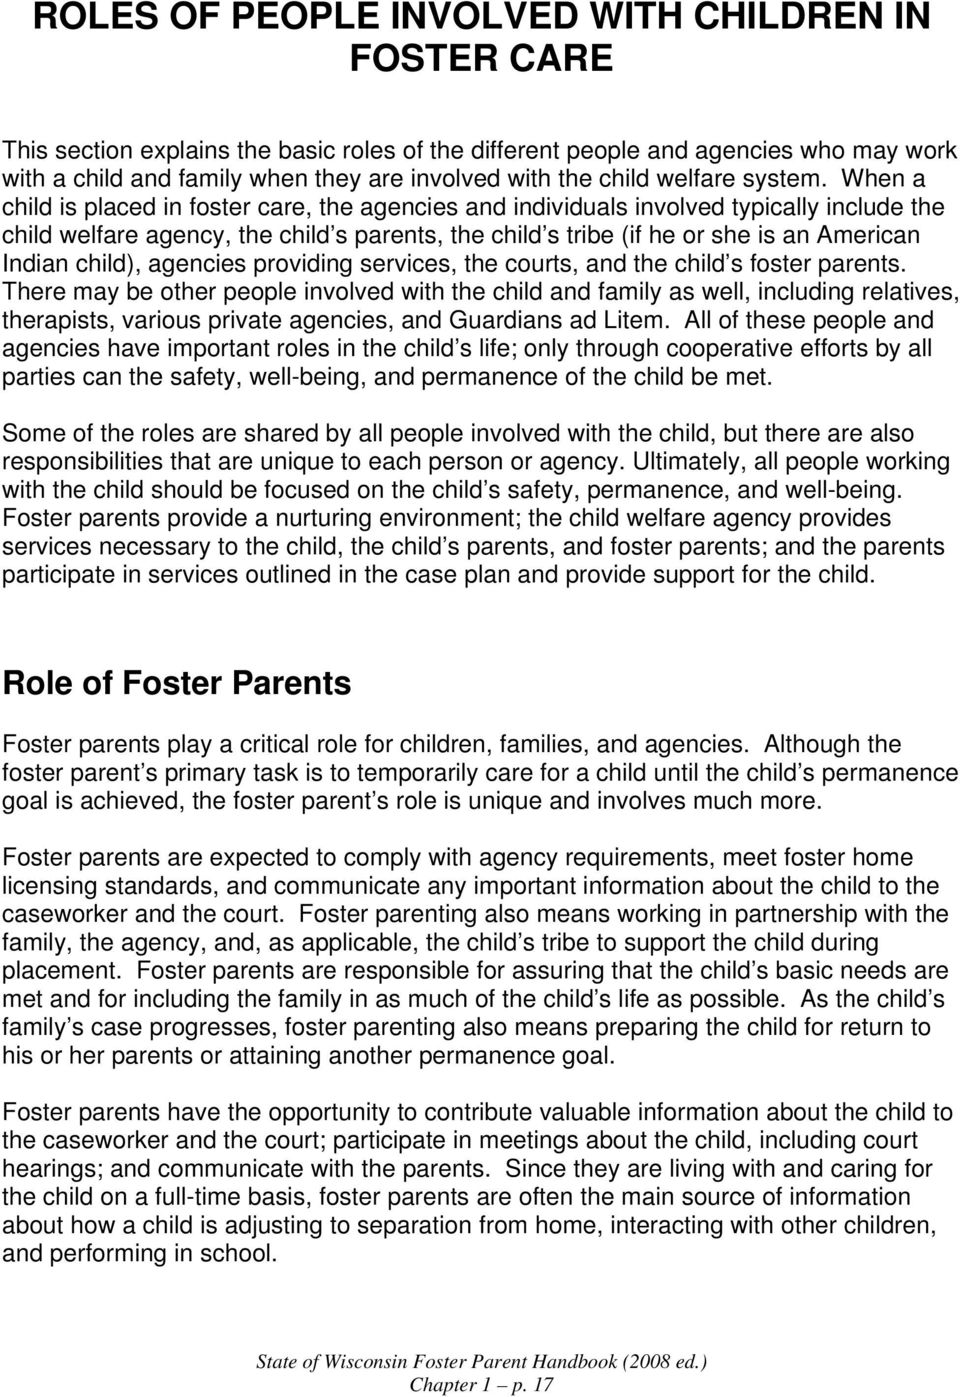 When a child is placed in foster care, the agencies and individuals involved typically include the child welfare agency, the child s parents, the child s tribe (if he or she is an American Indian